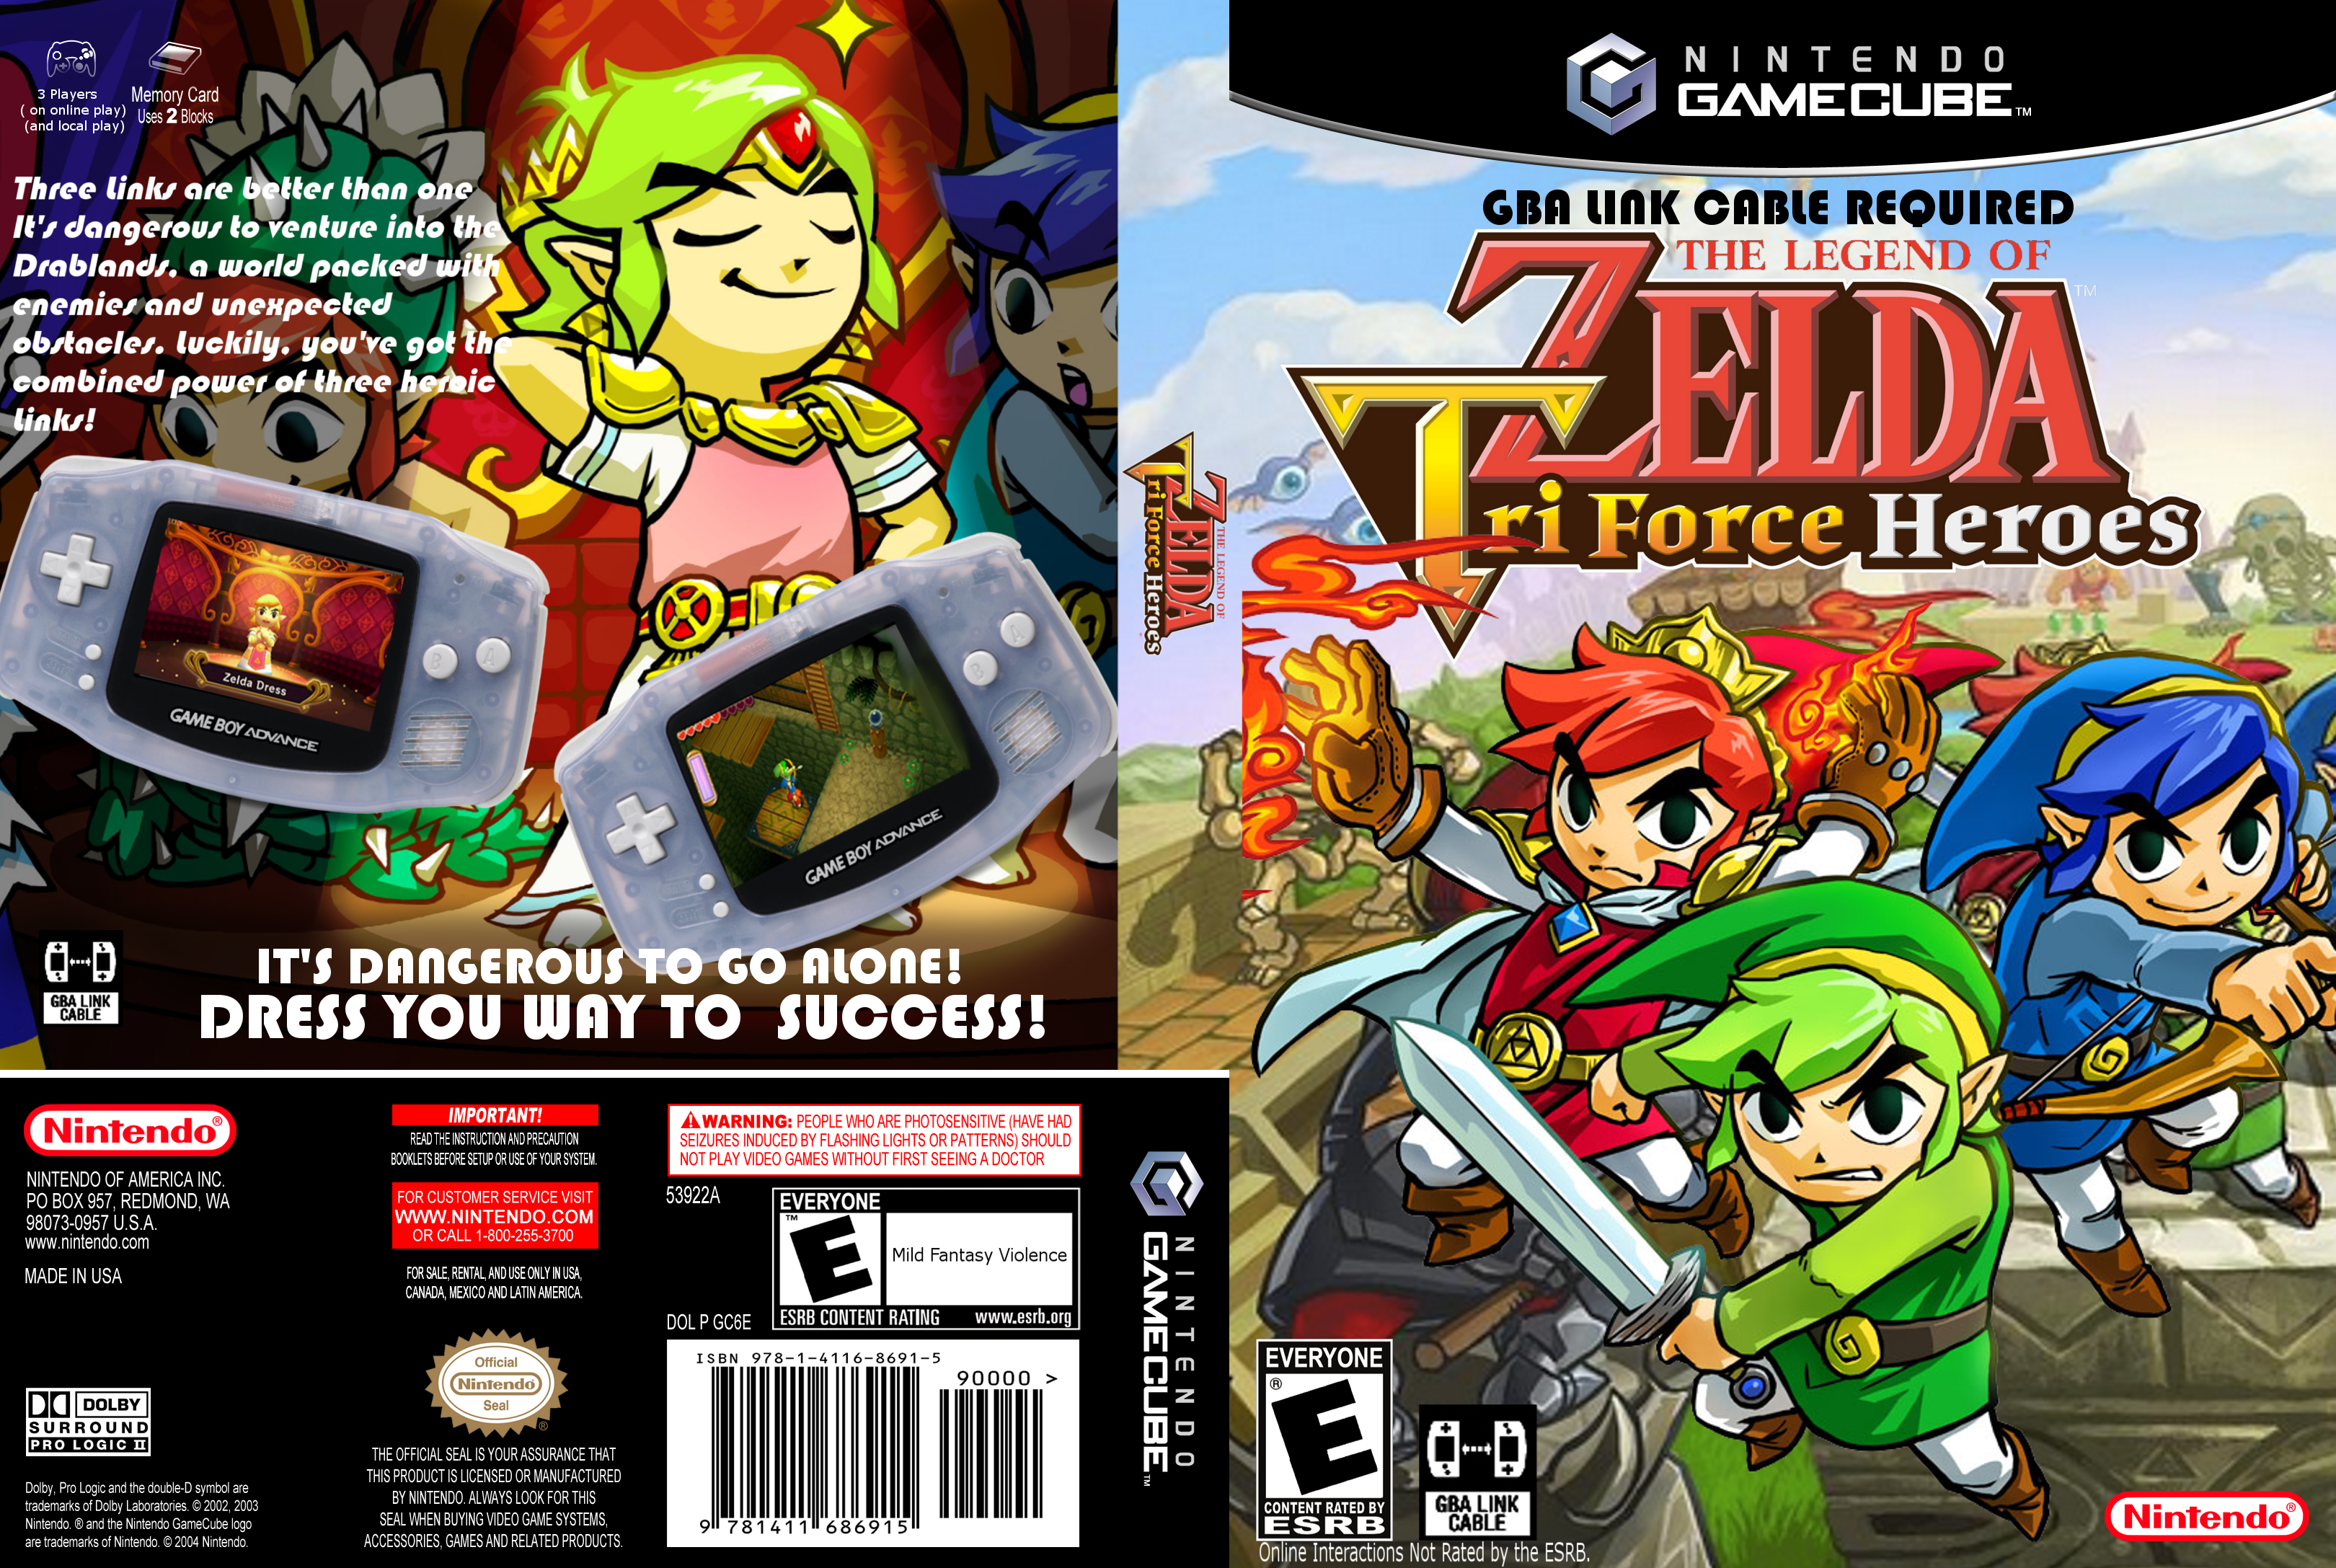 The Legend Of Zelda: Triforce Heroes box cover